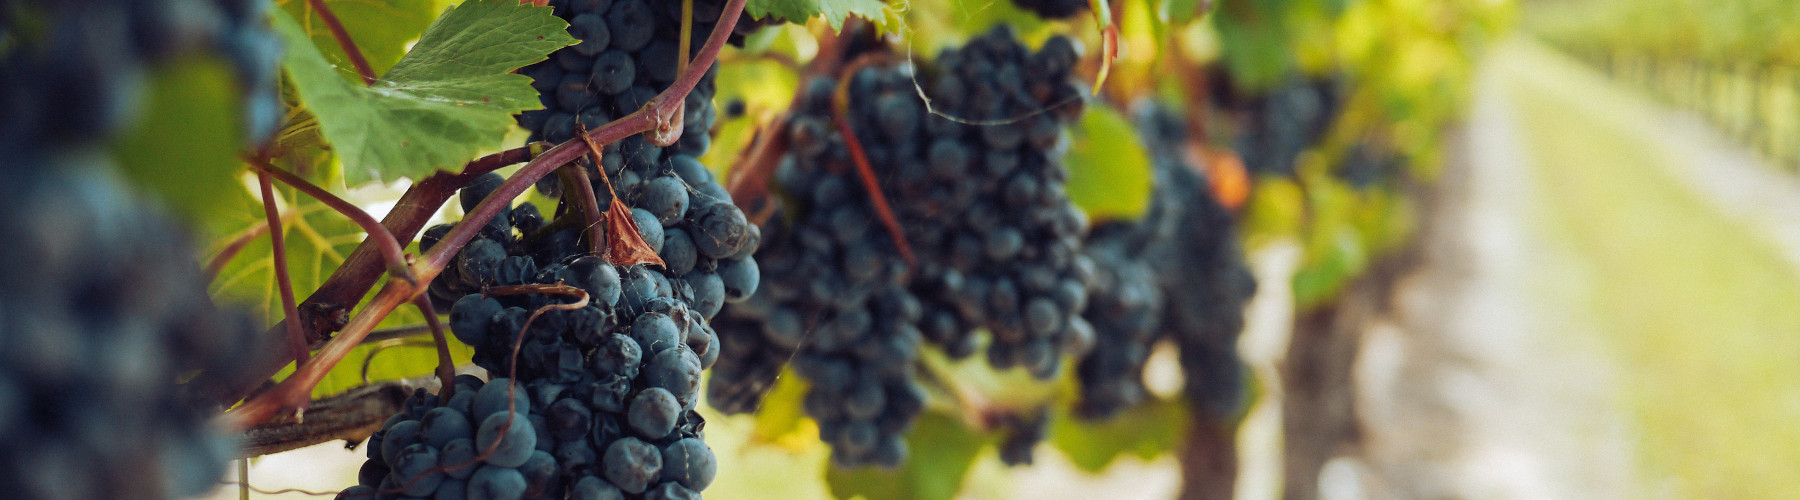 [Courtesy of pexels](https://www.pexels.com/photo/bunches-of-grapes-hanging-from-vines-3840335/)